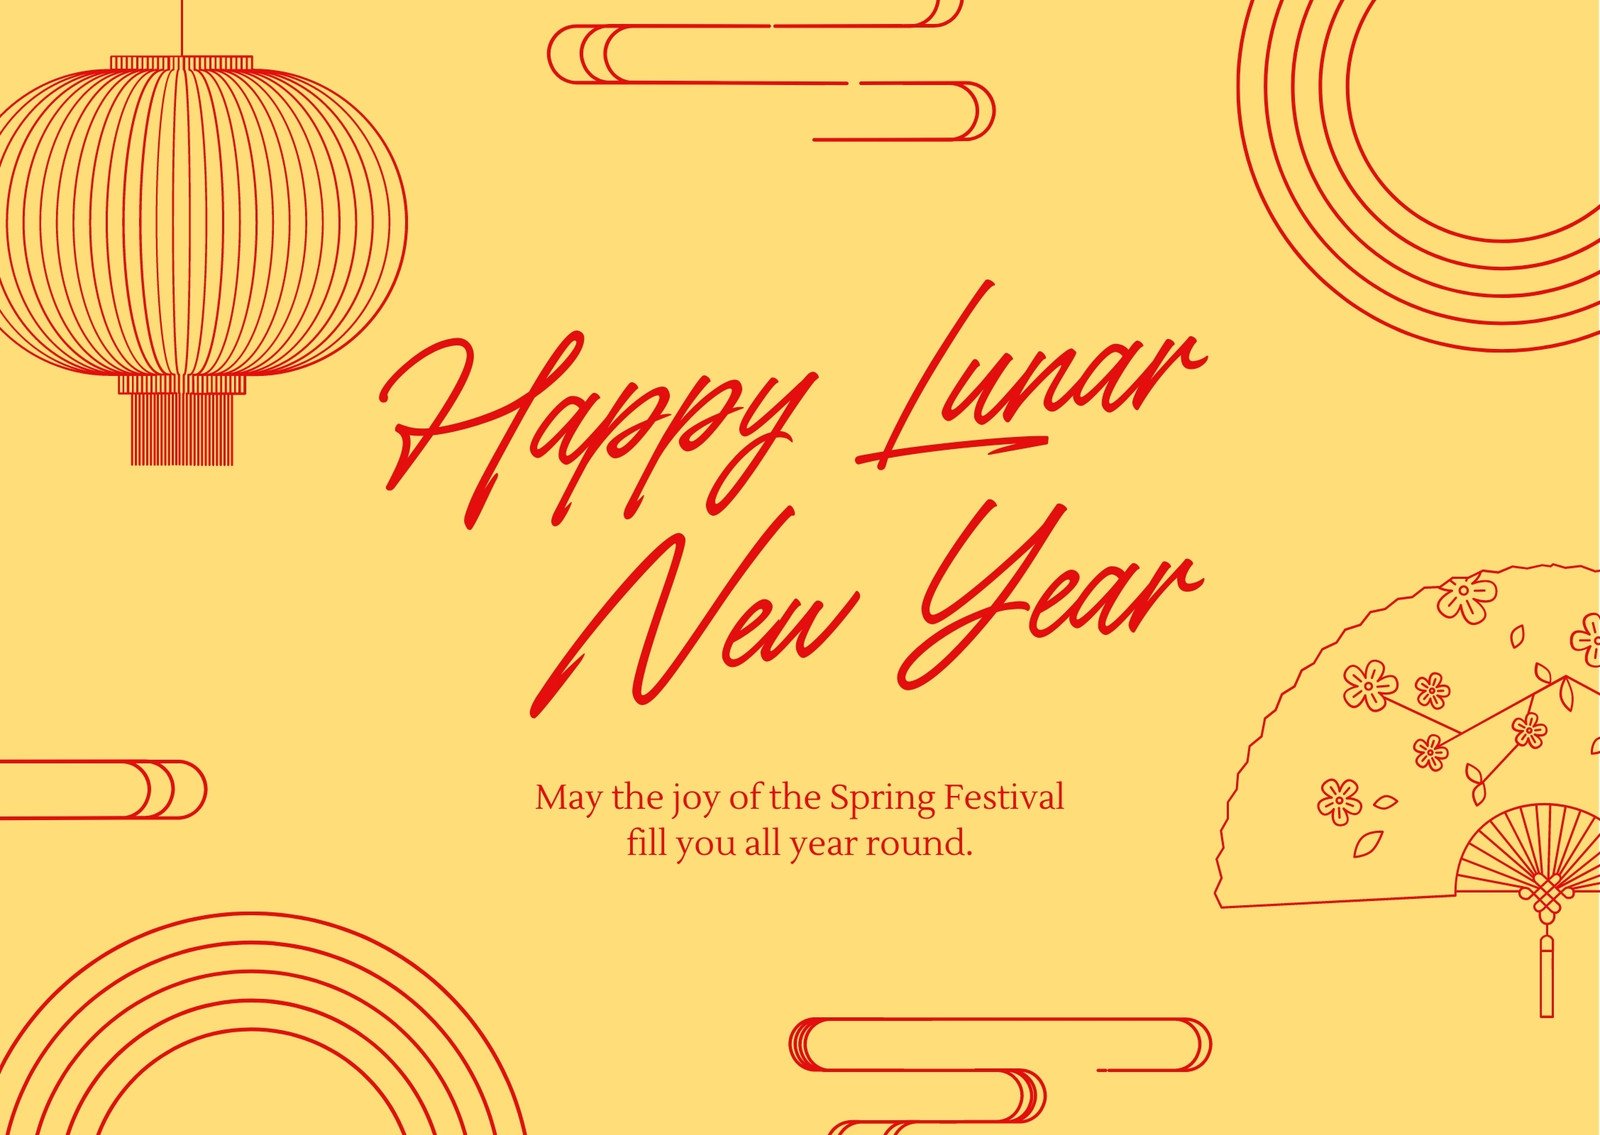 Free custom printable Chinese New Year card templates